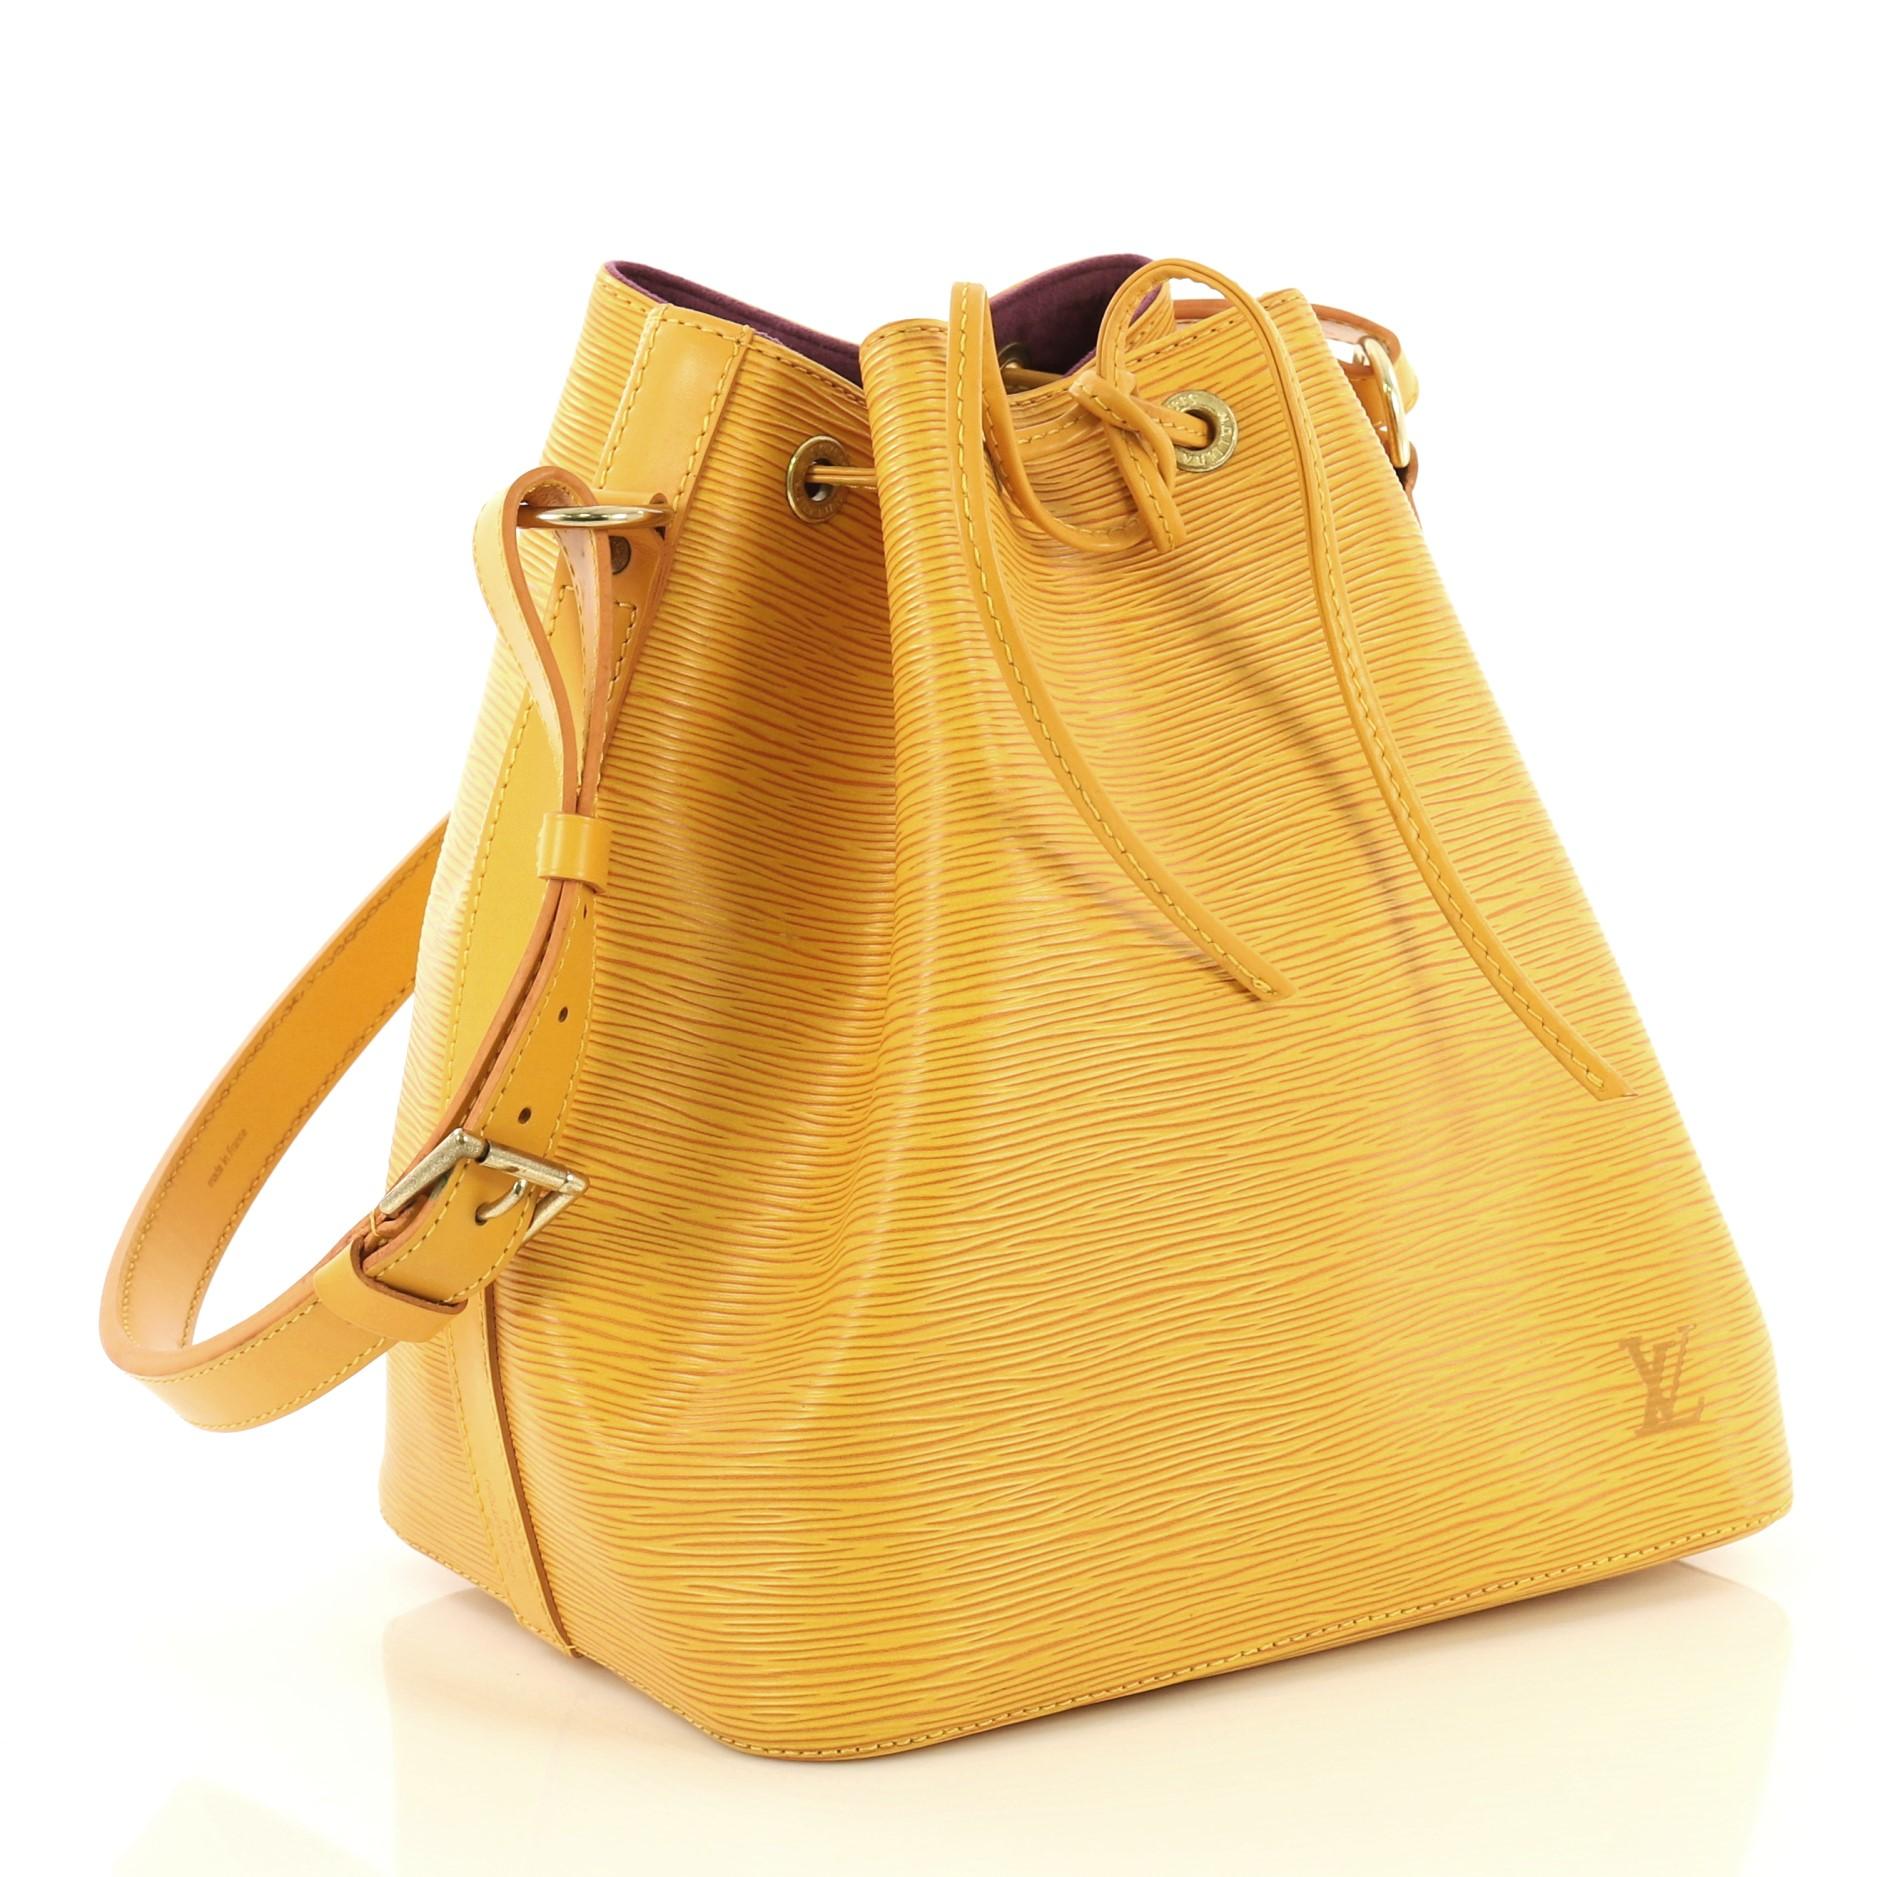 This Louis Vuitton Petit Noe Handbag Epi Leather, crafted in yellow epi leather, features adjustable shoulder strap, subtle LV logo, and gold-tone hardware. Its drawstring closure opens to a purple microfiber interior. Authenticity code reads: